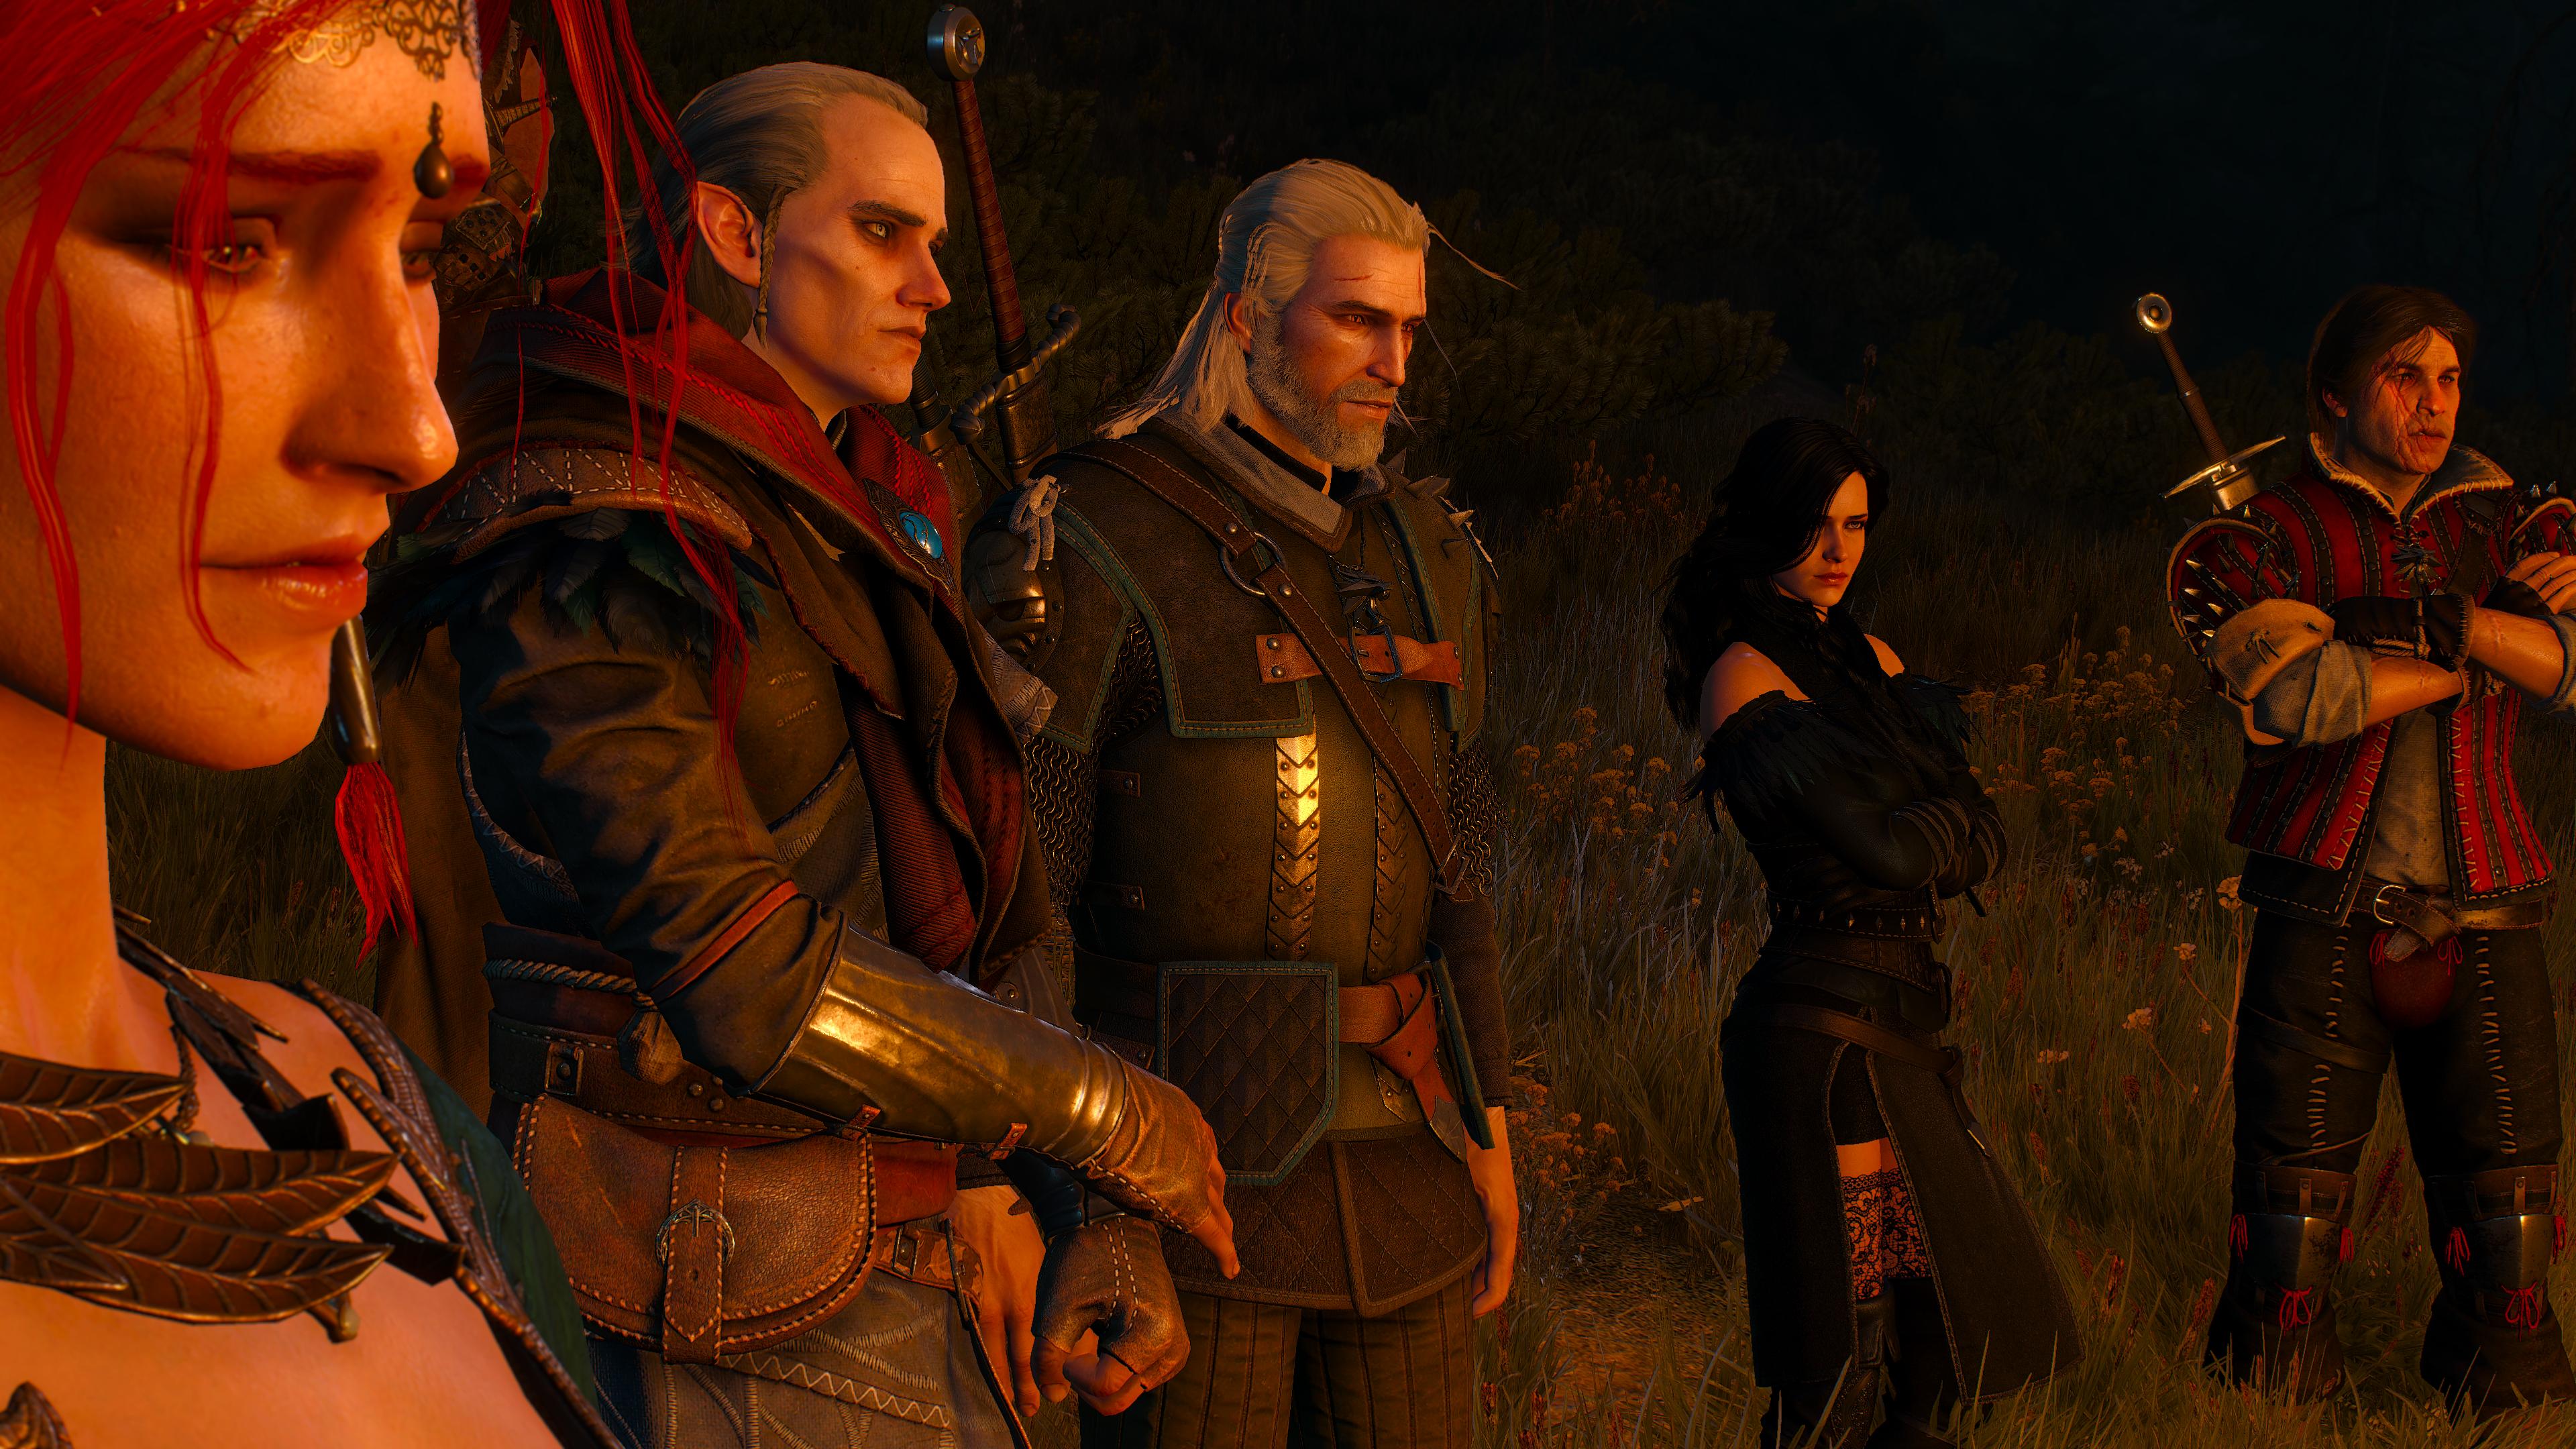 The Witcher' Season 3 makes a brazen reference to 'Carrie